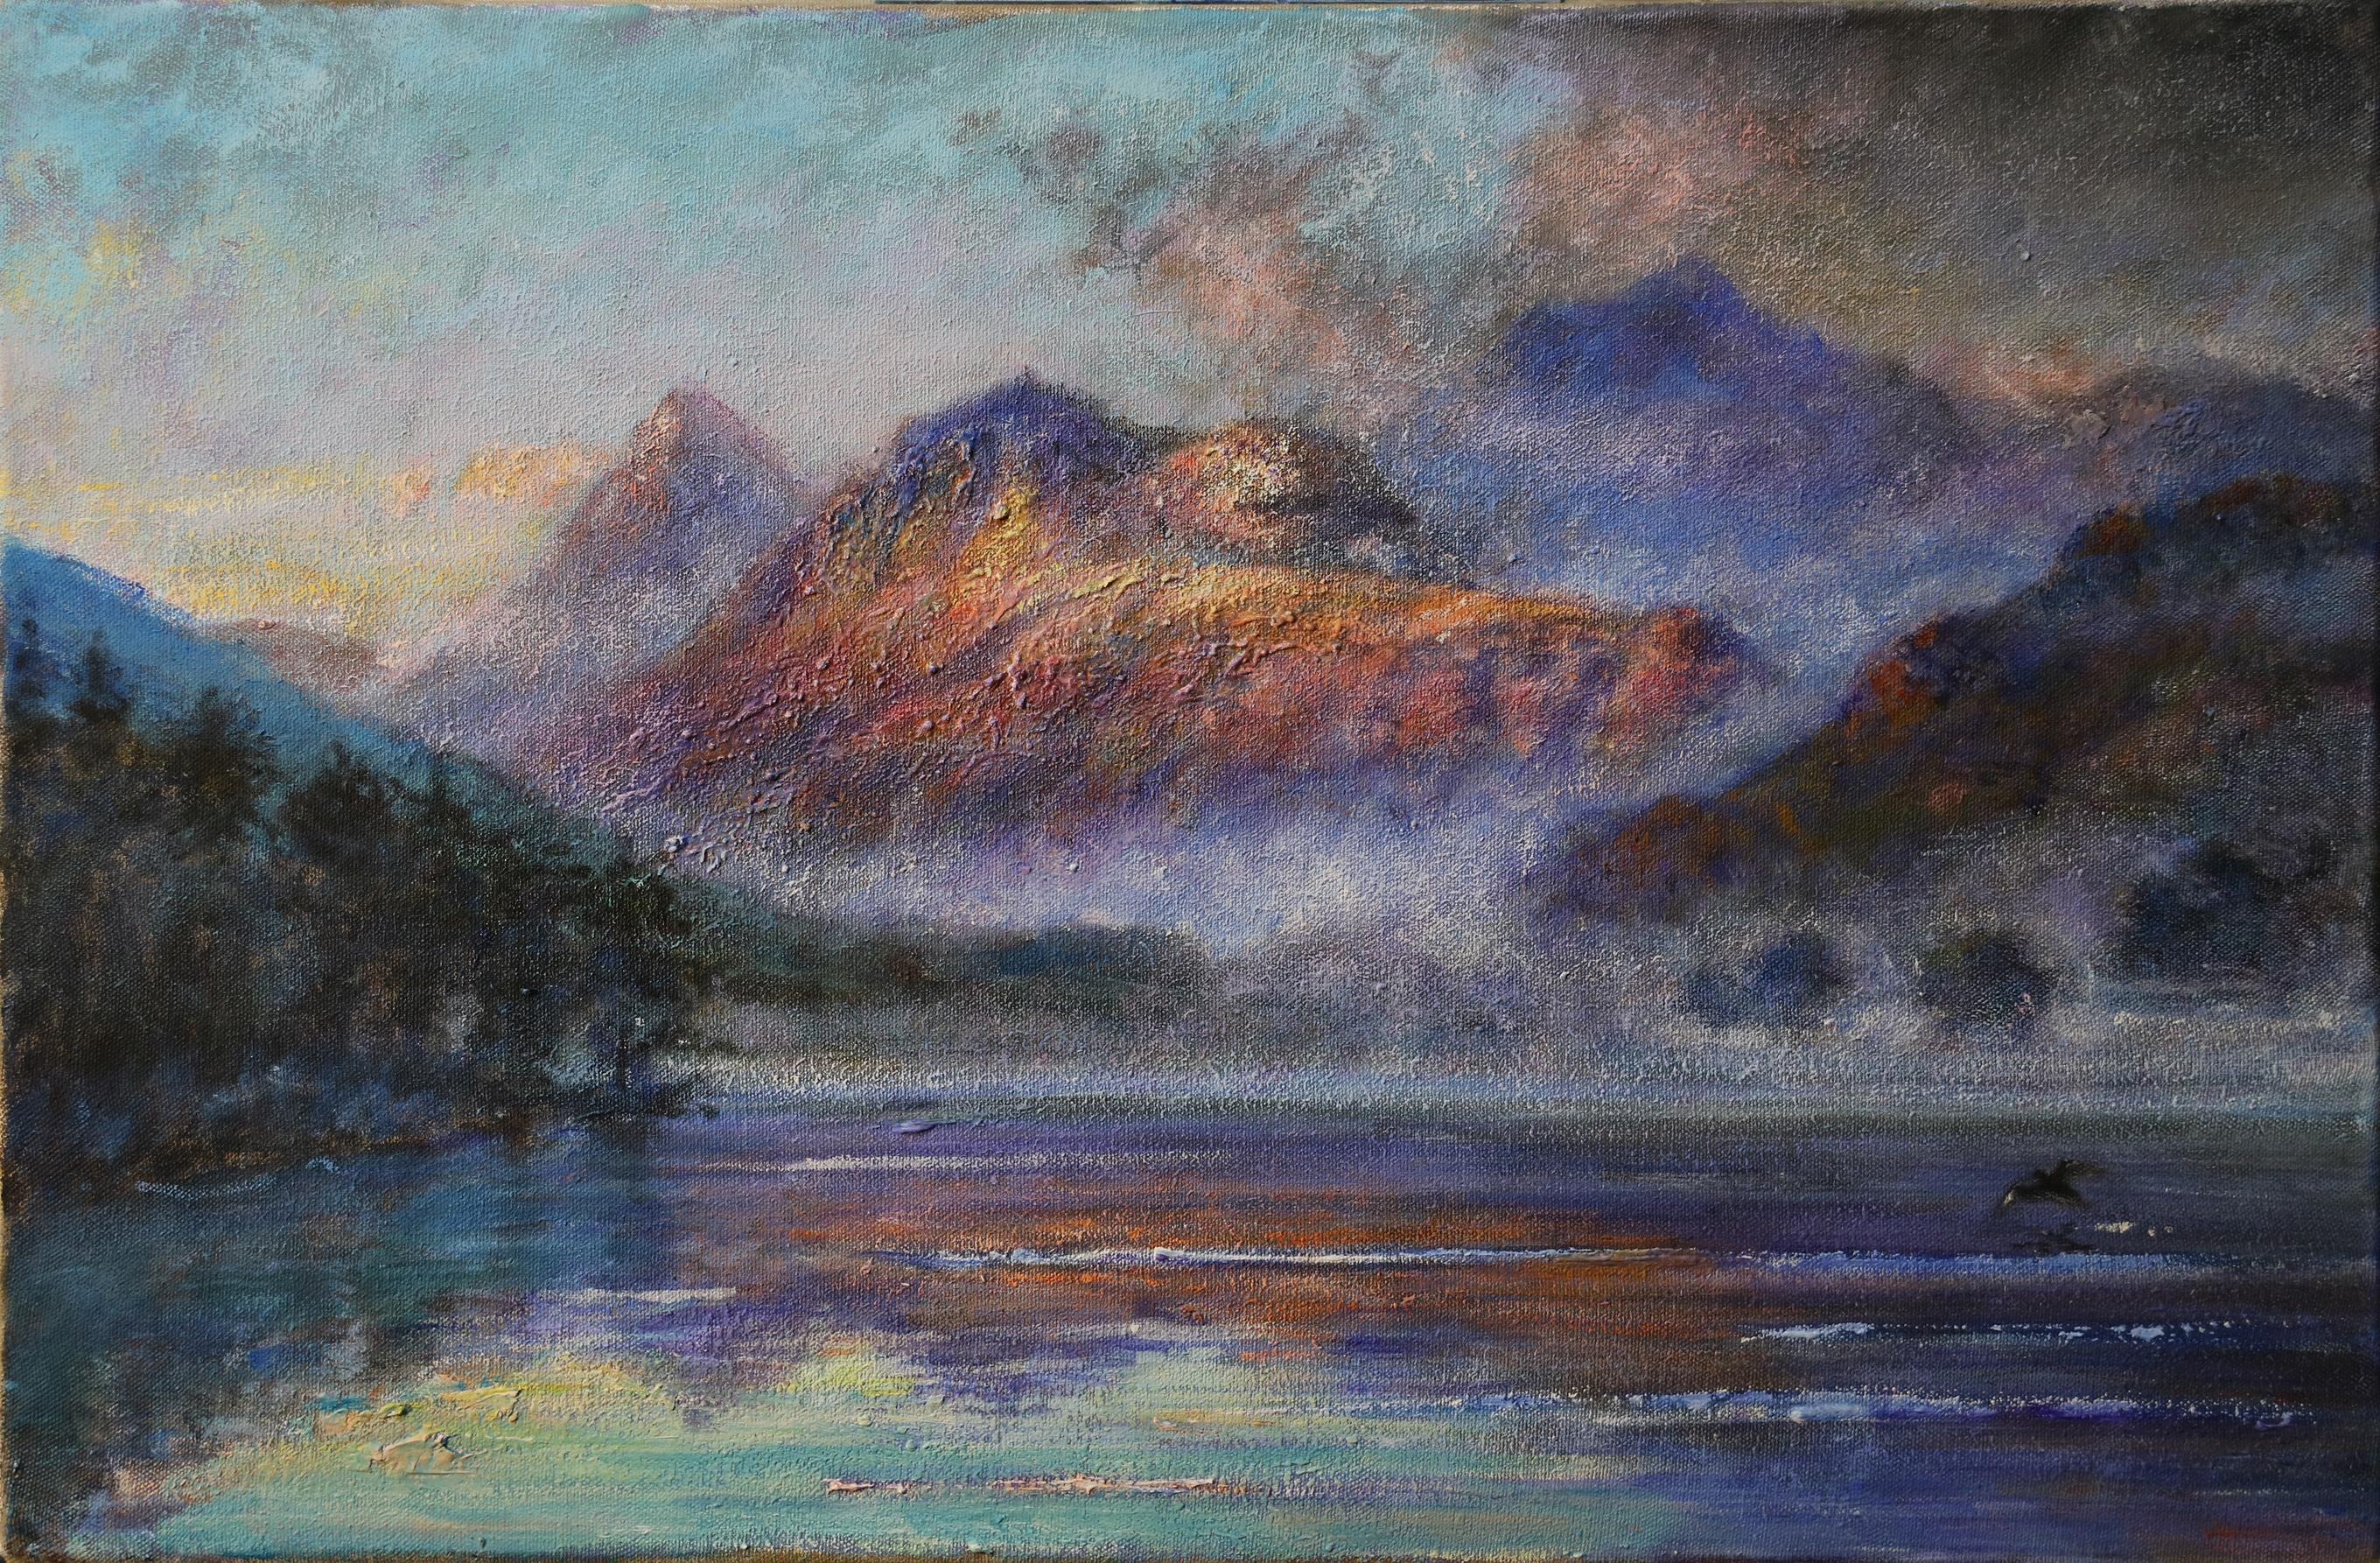 Langdale Pikes, Lake District England Mountains, mist and Lake scene original oil